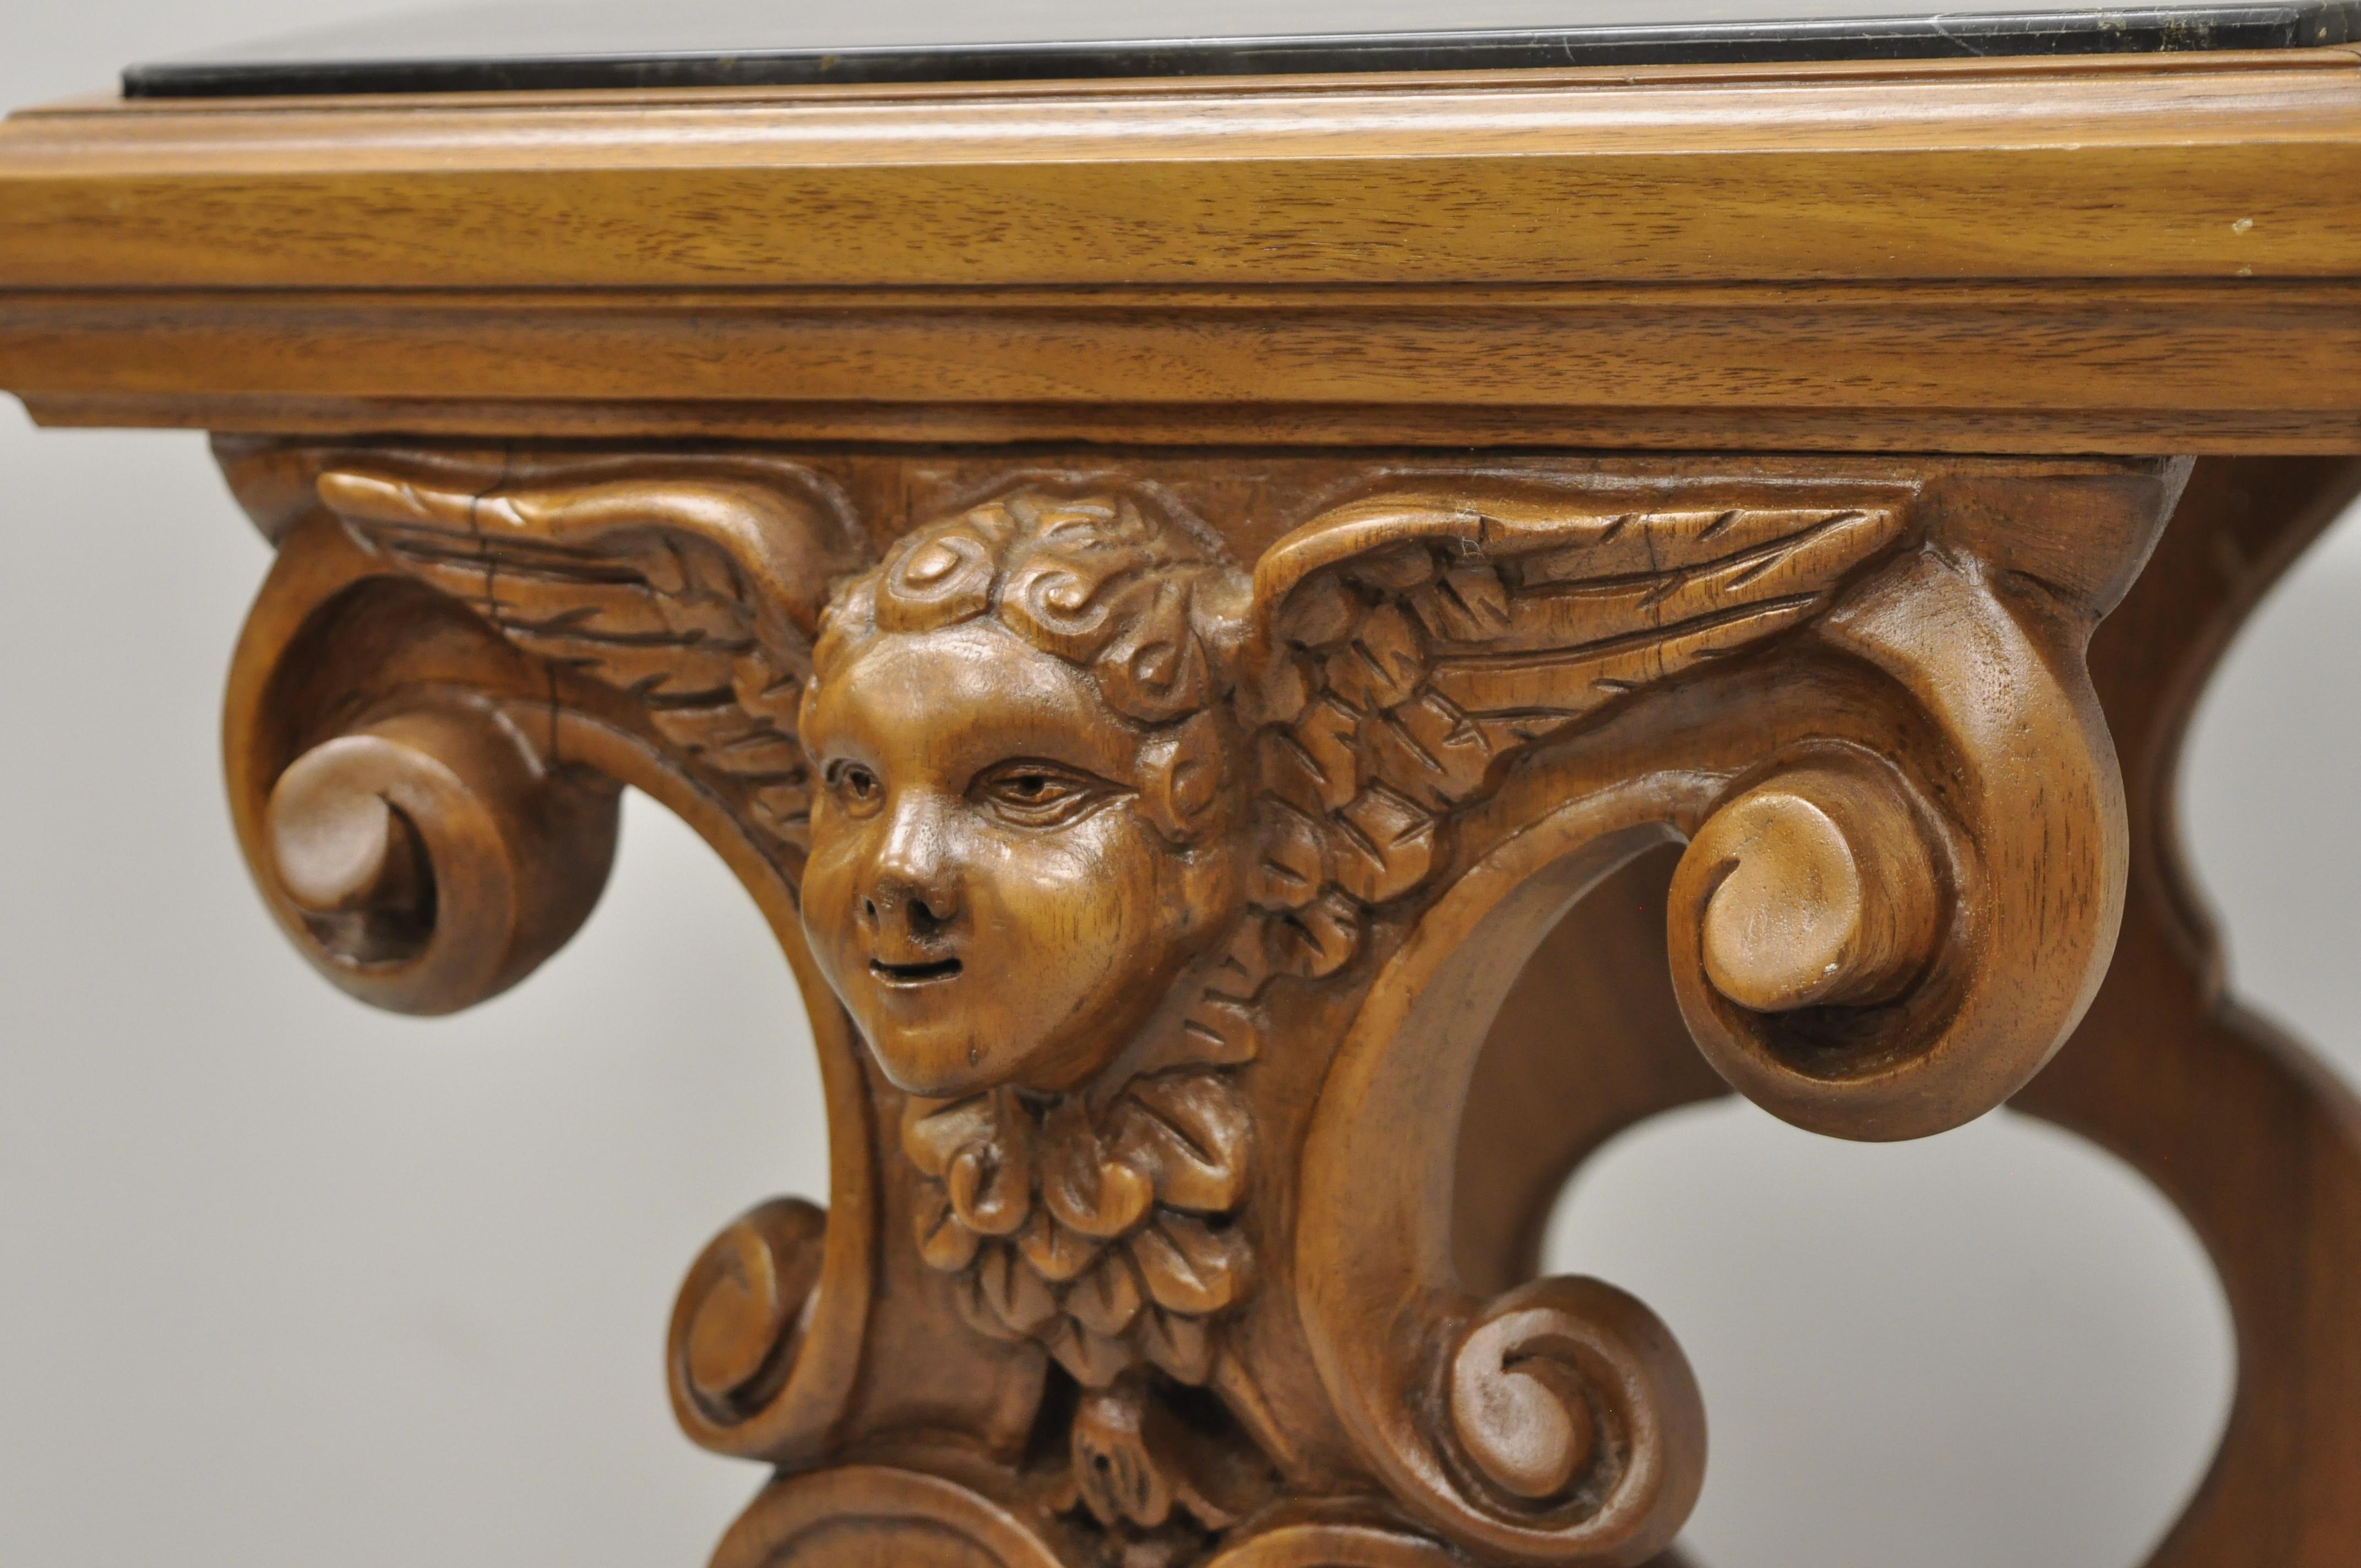 European Italian Renaissance Figural Carved Marble Top Side Table with Winged Cherub Head For Sale